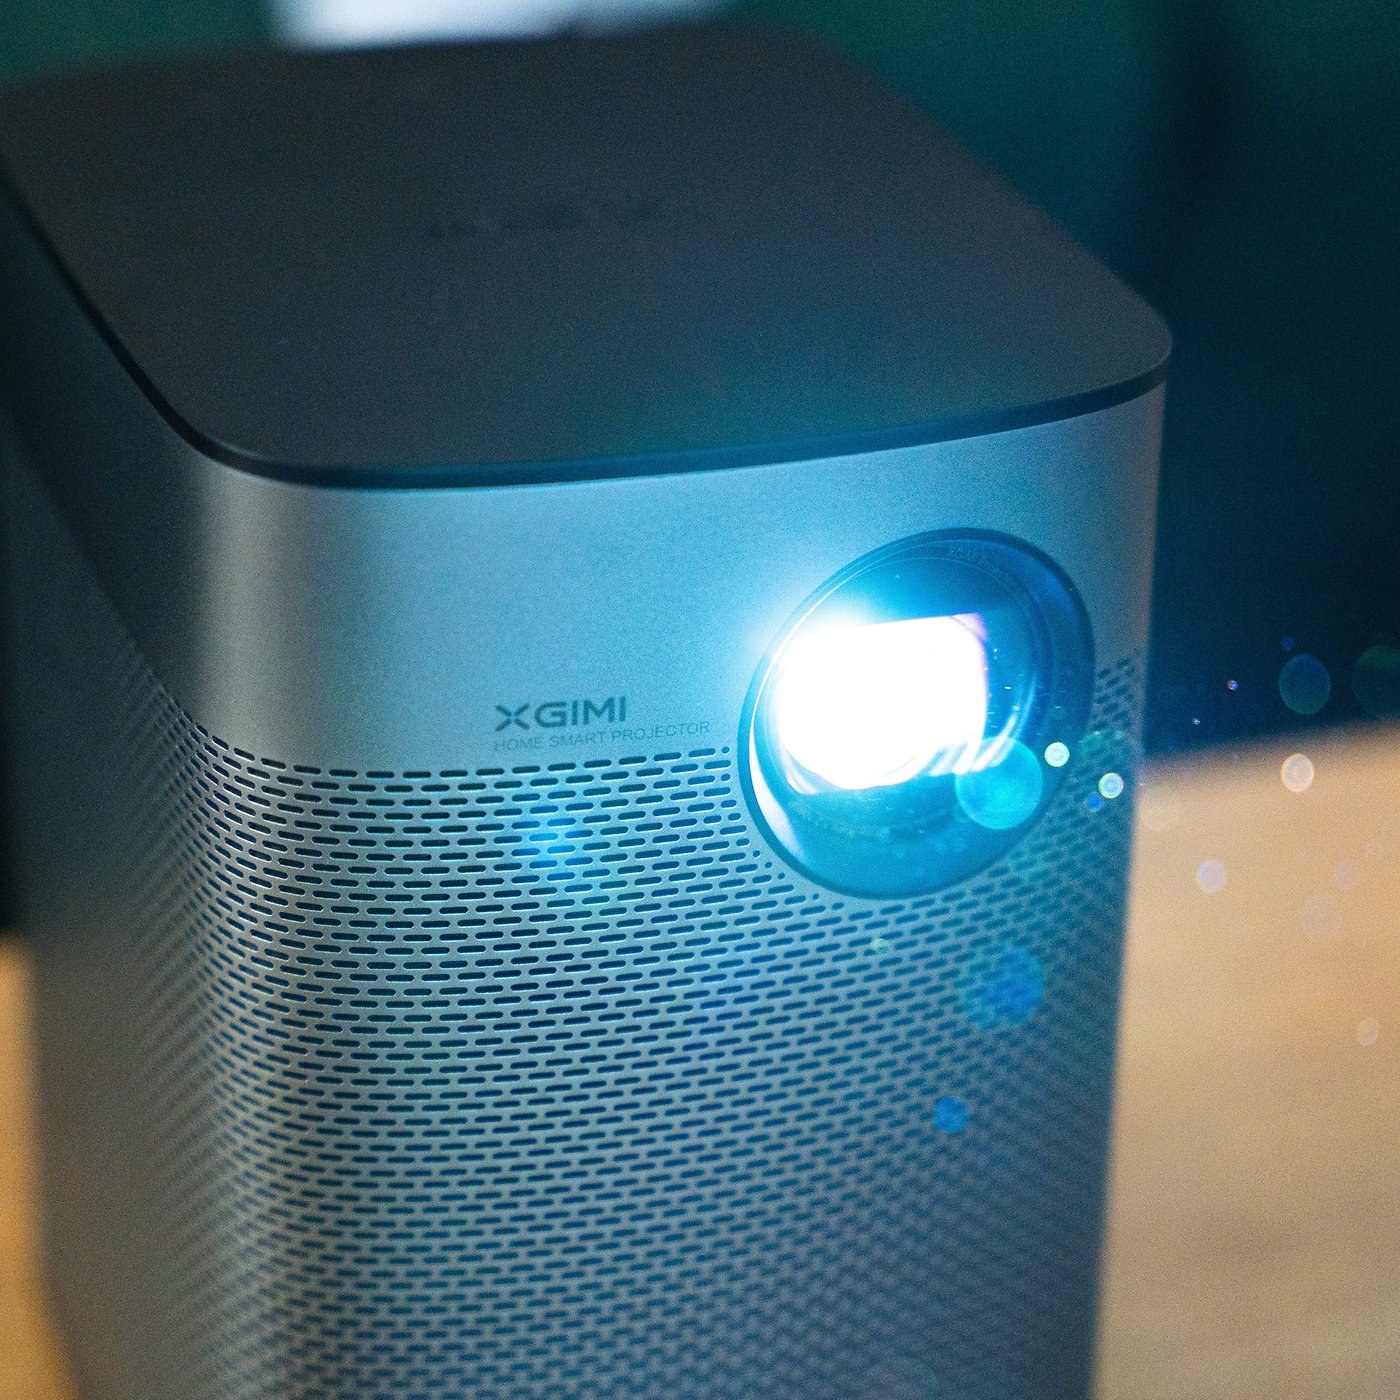 xgimi projector